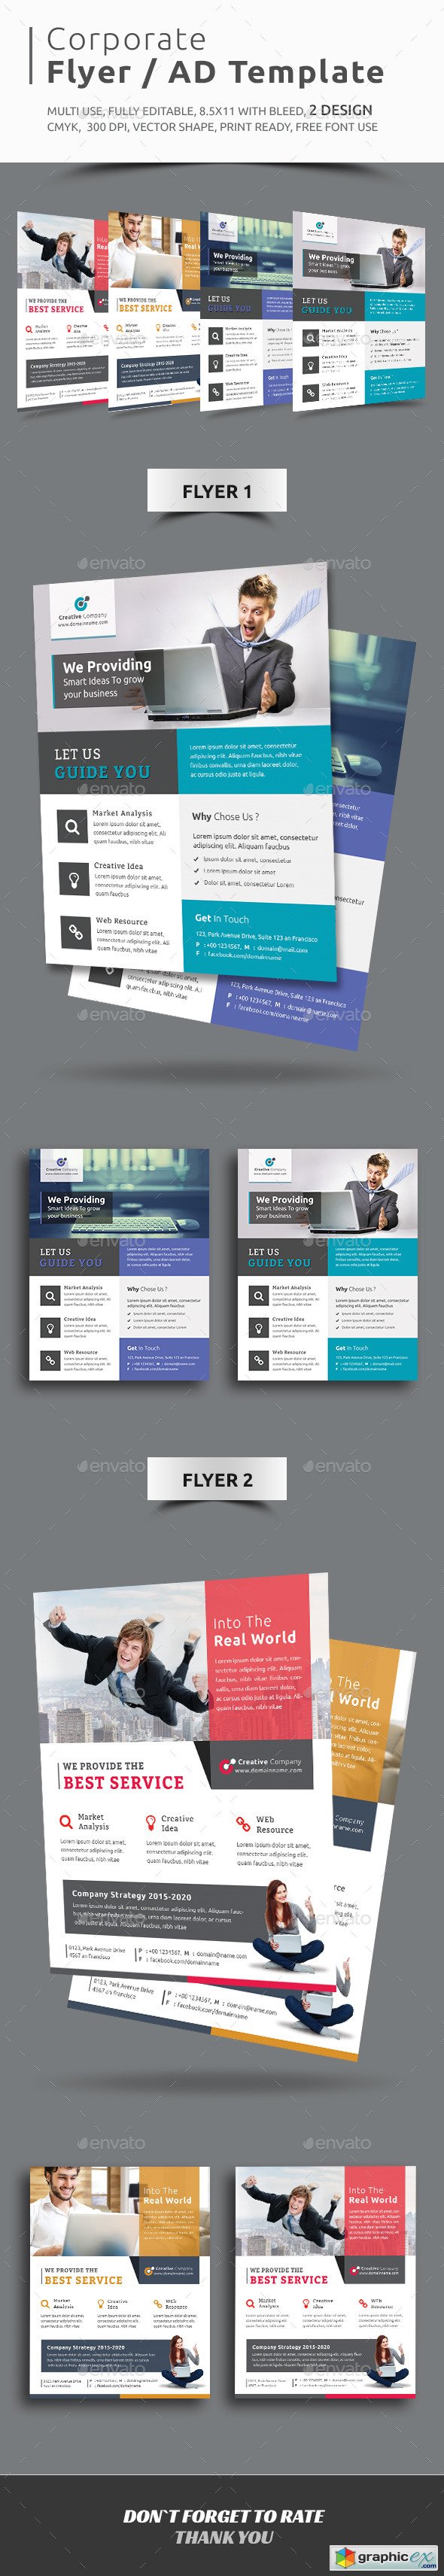 Corporate Flyer AD Template